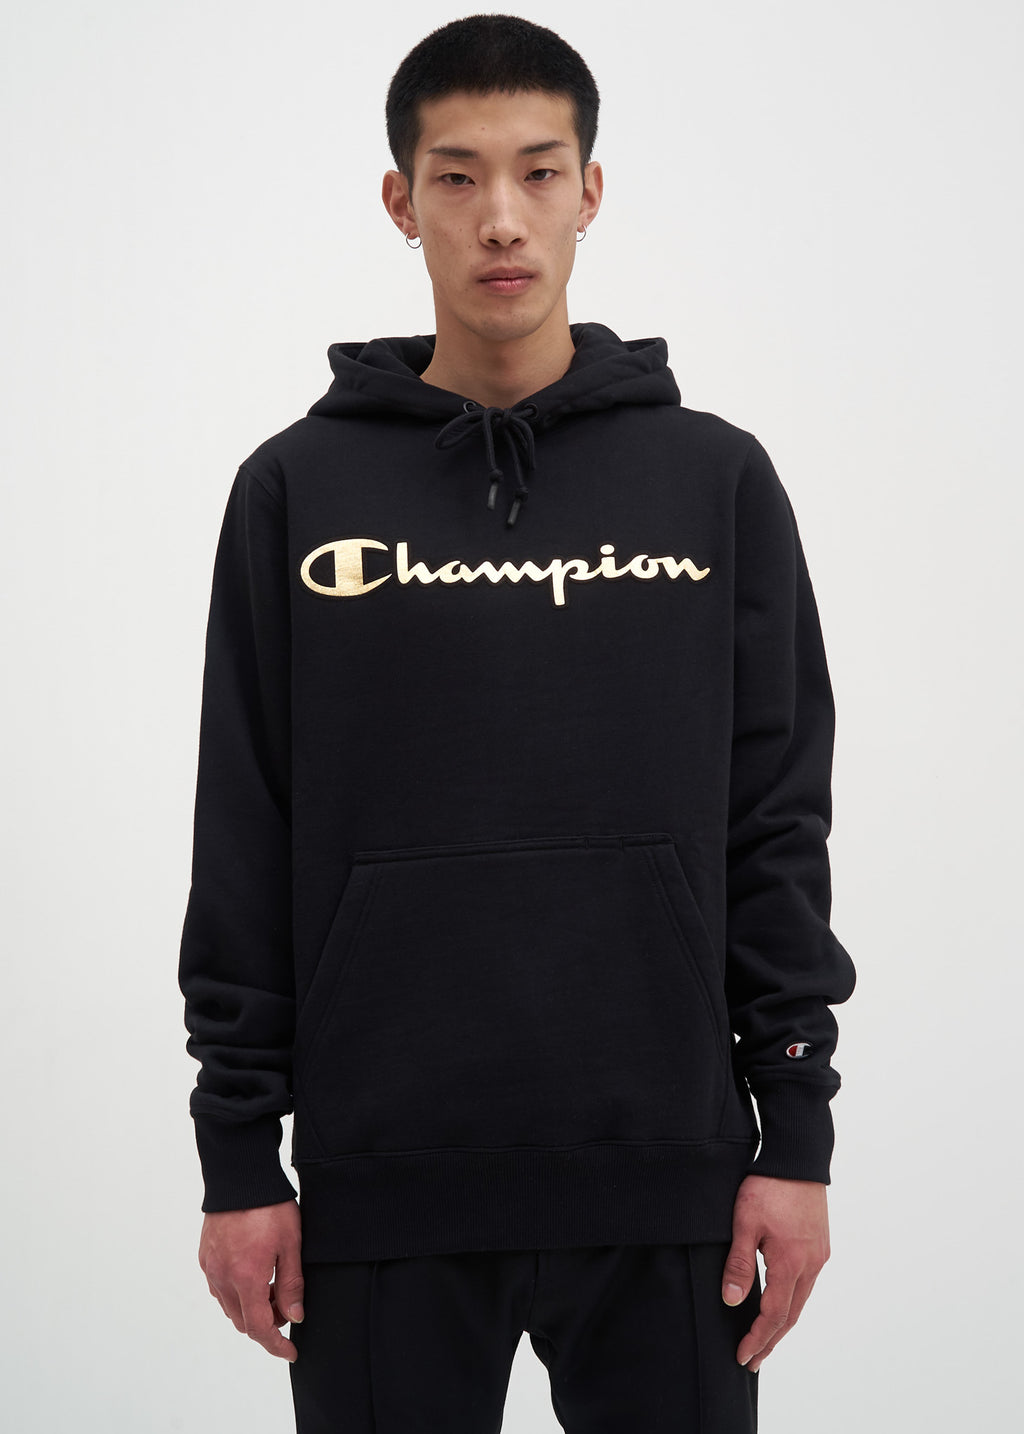 black champion hoodie with gold logo